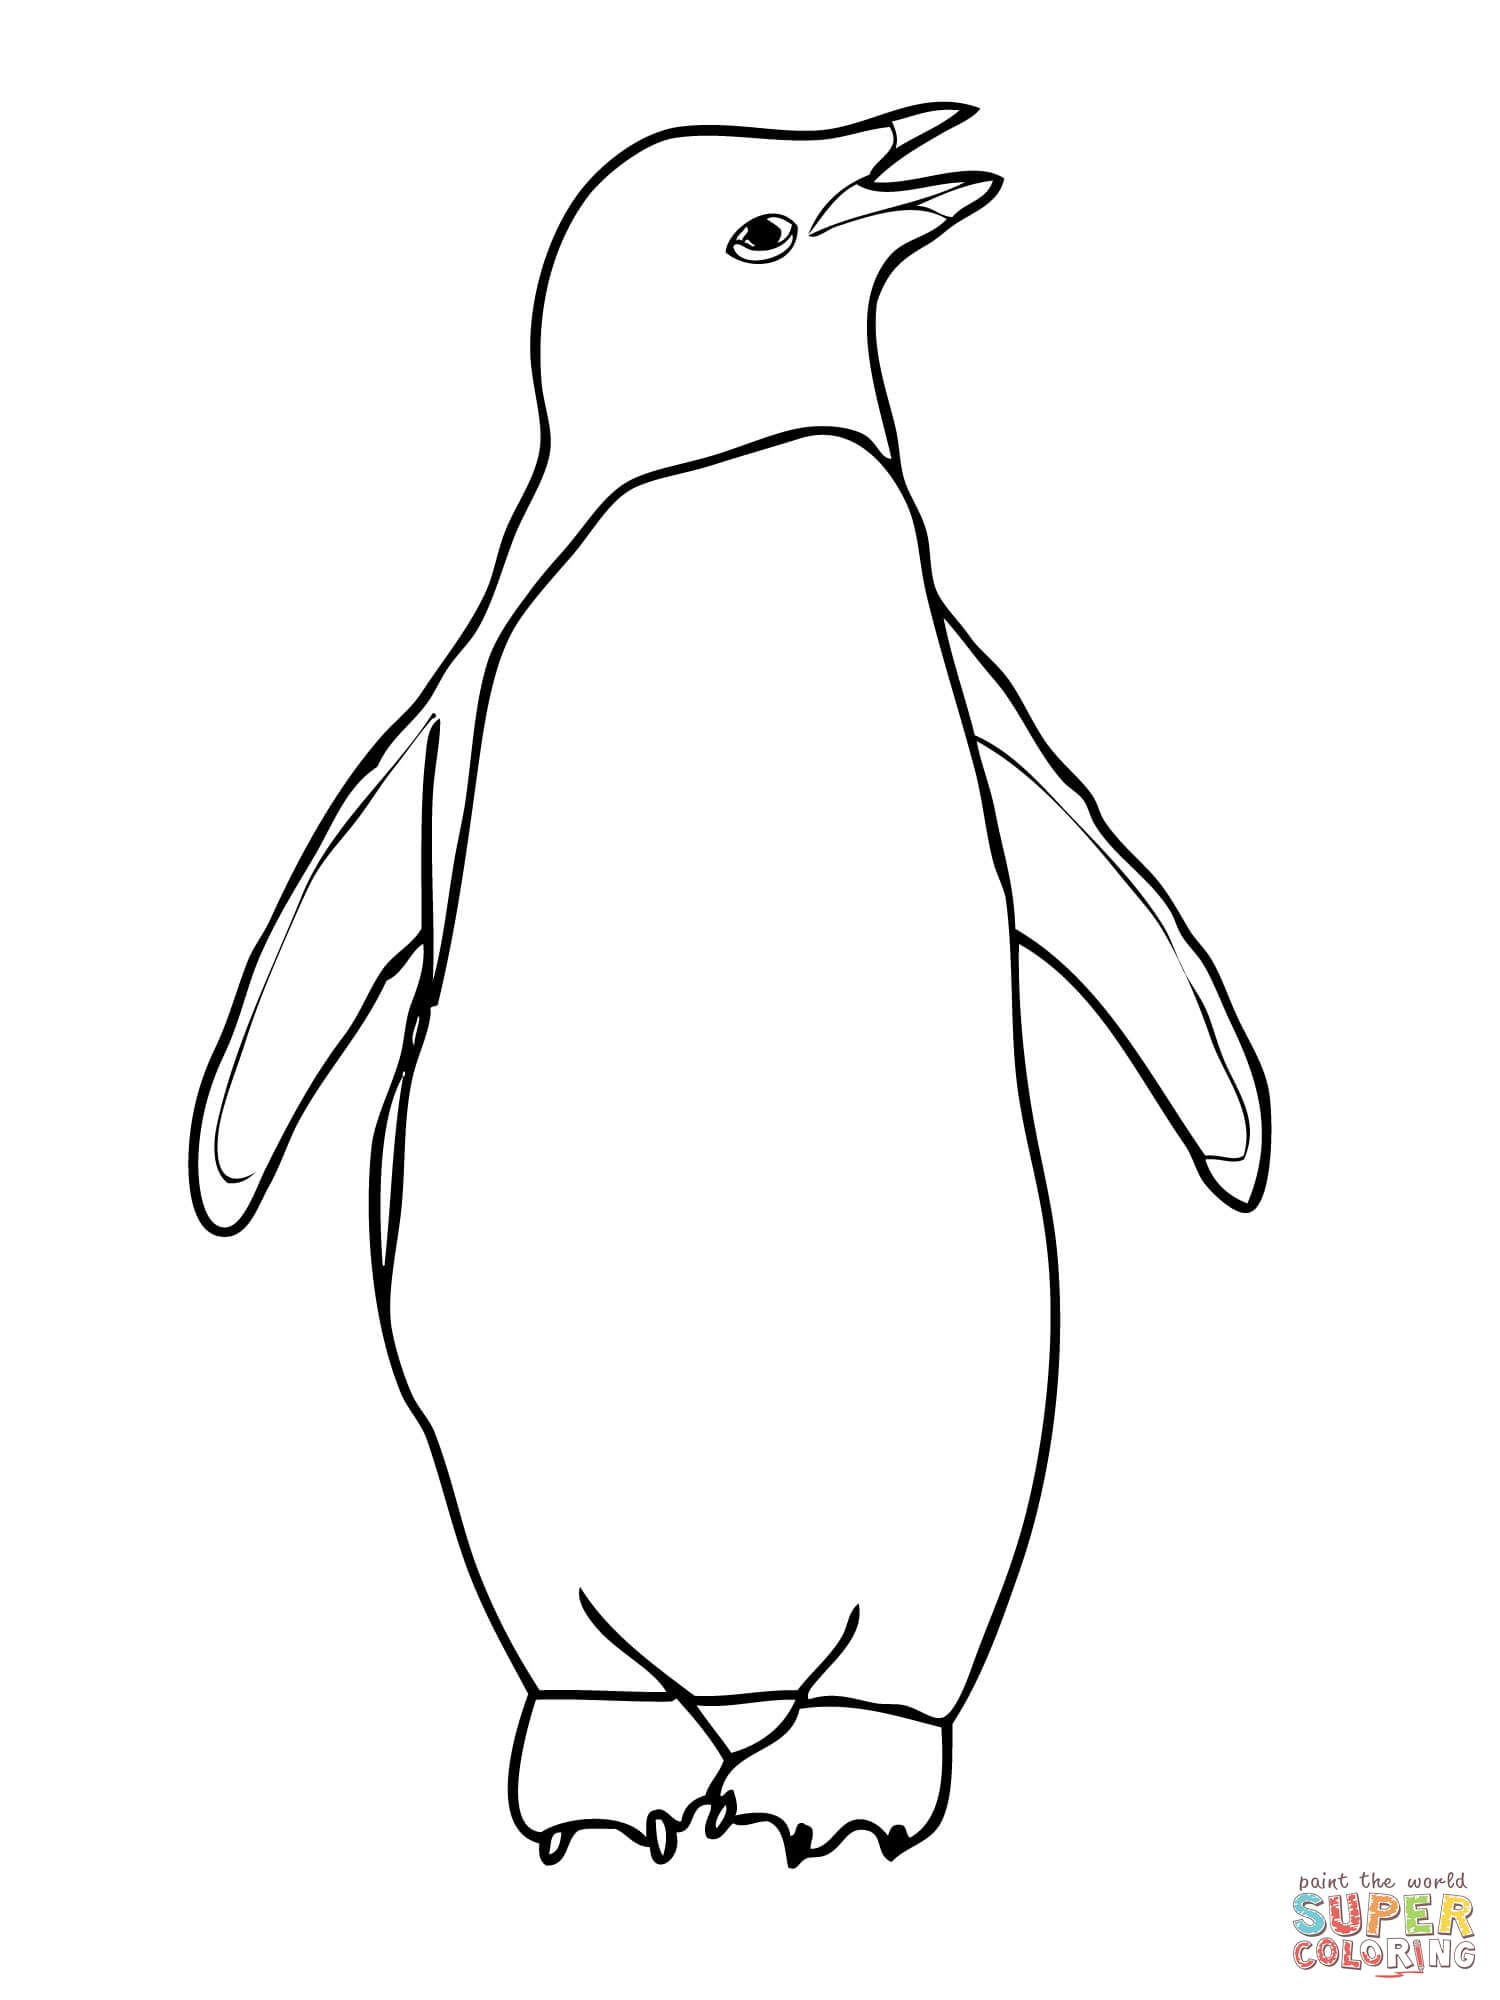 Adelie Penguin Coloring Page | Free Printable Coloring Pages - Free Printable Penguin Books